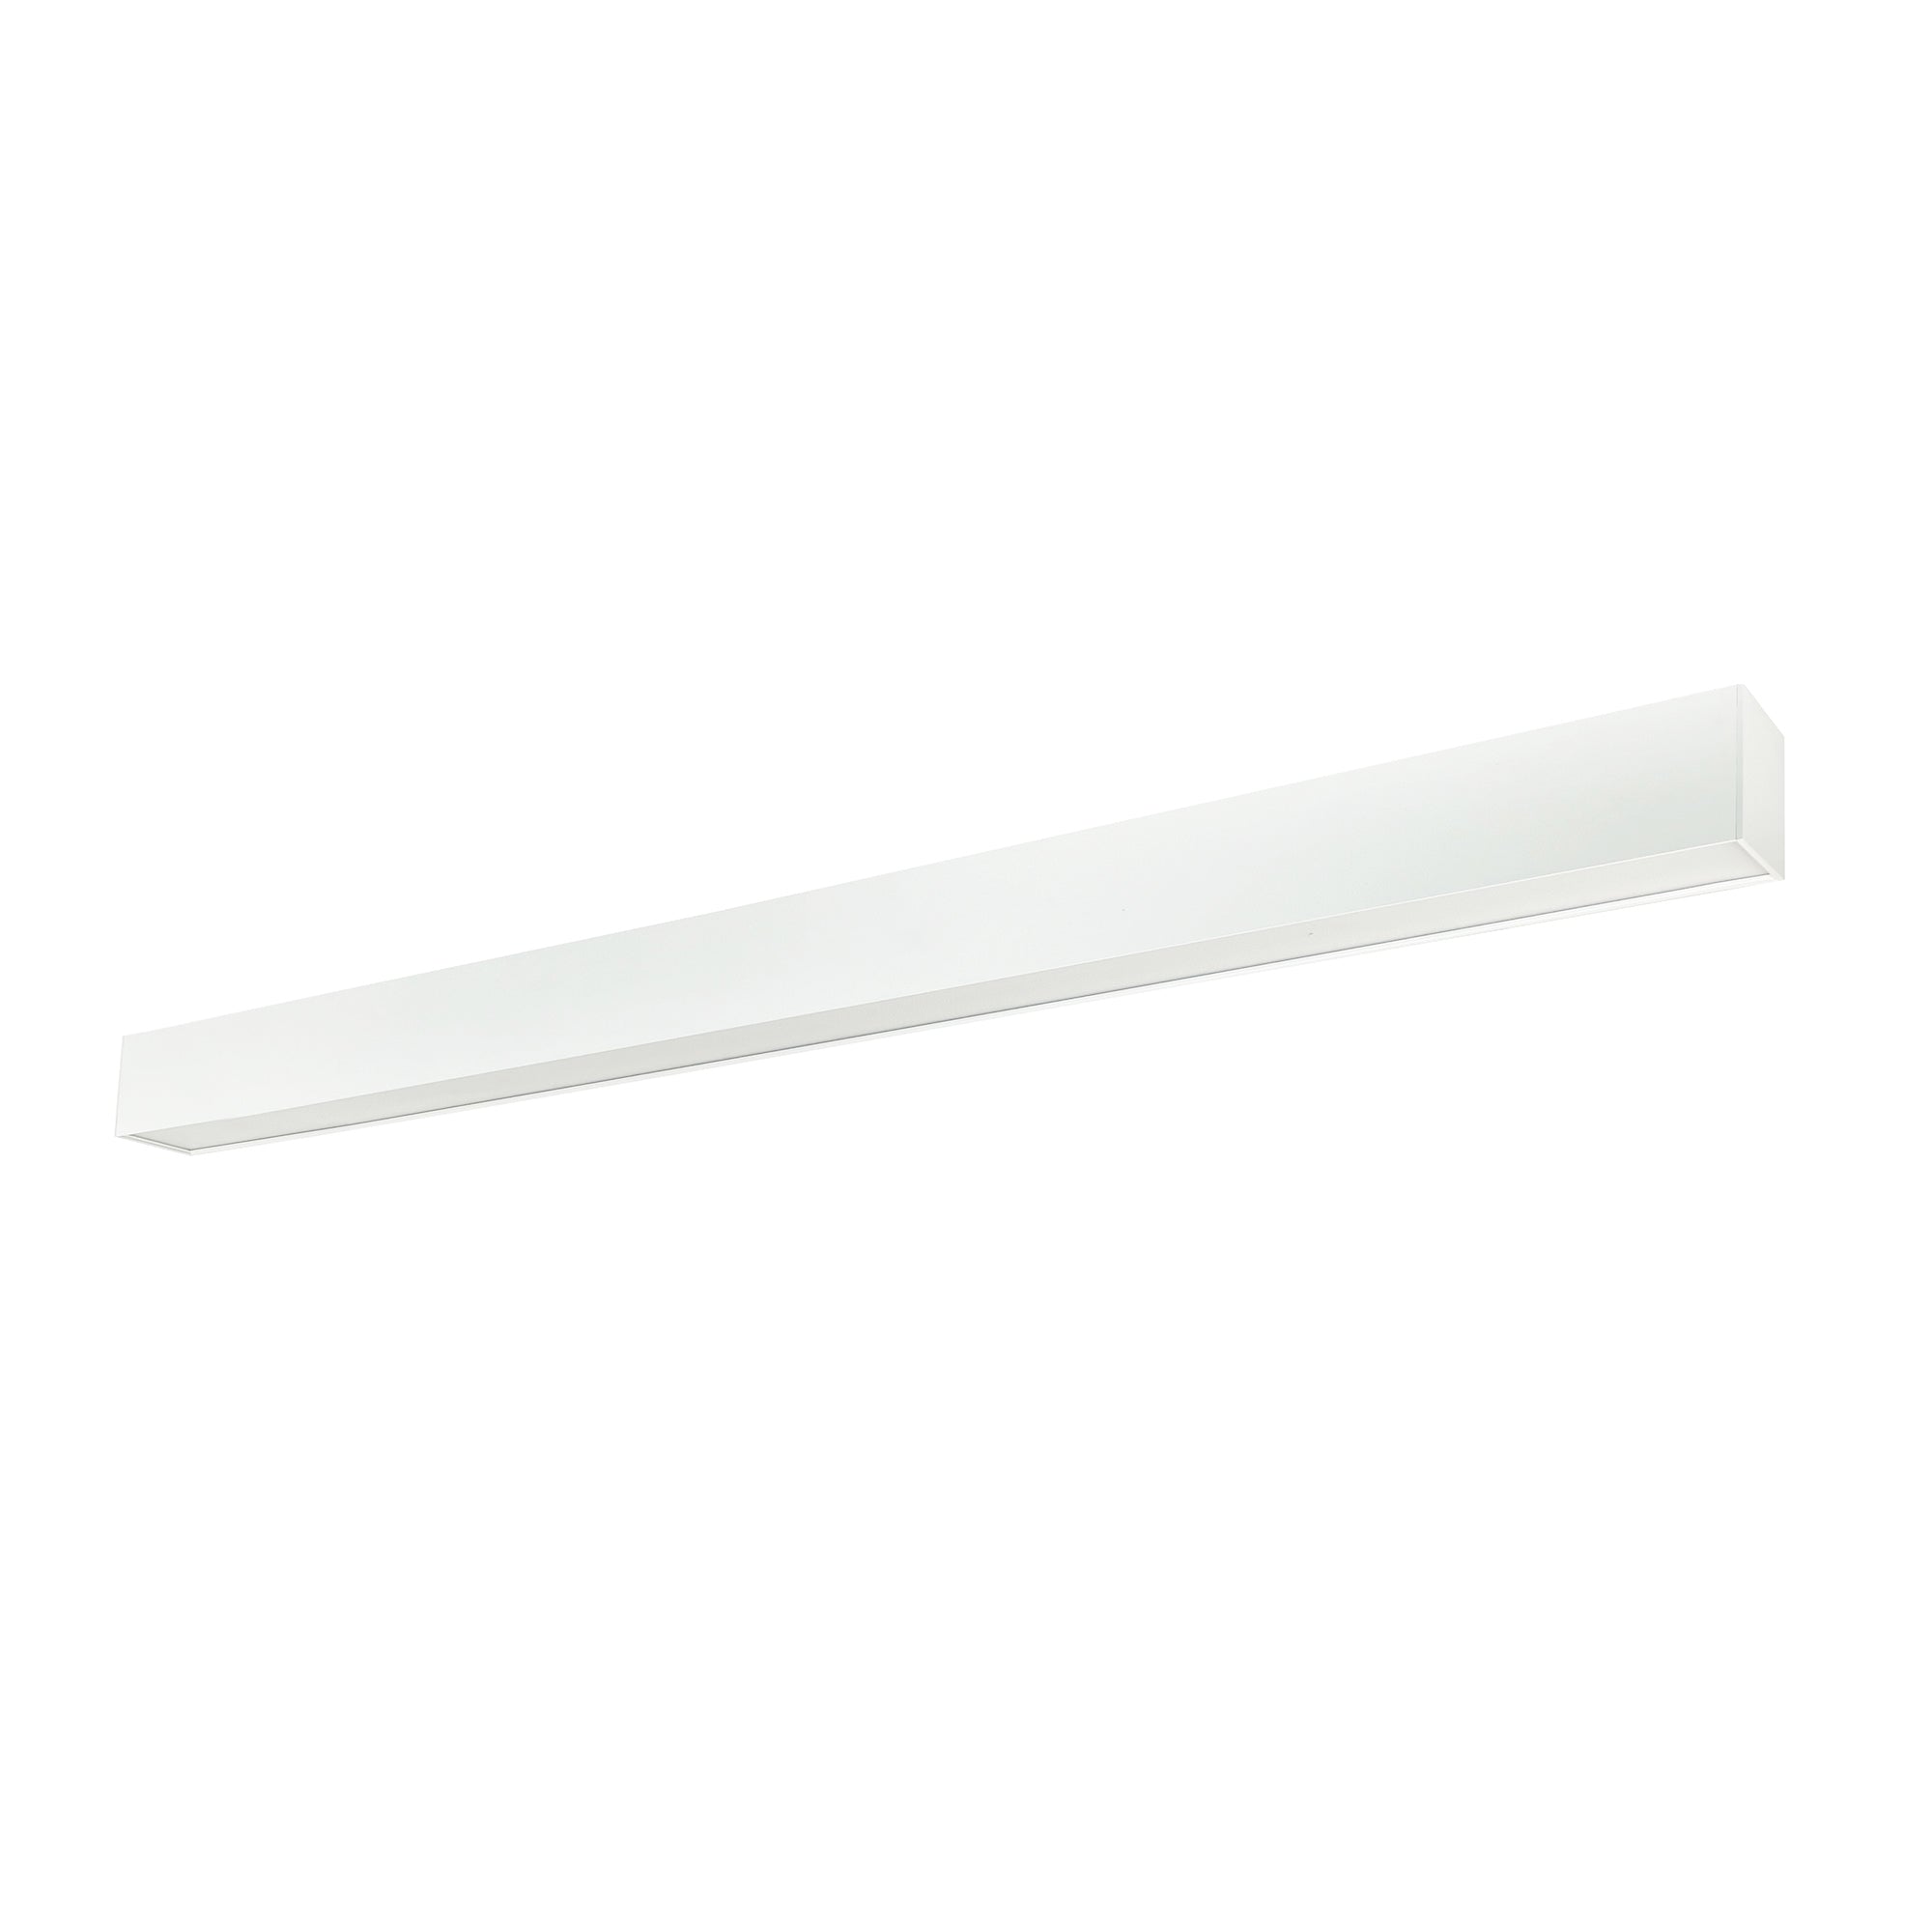 Nora Lighting NLUD-8334W - Linear - 8' L-Line LED Indirect/Direct Linear, 12304lm / Selectable CCT, White Finish